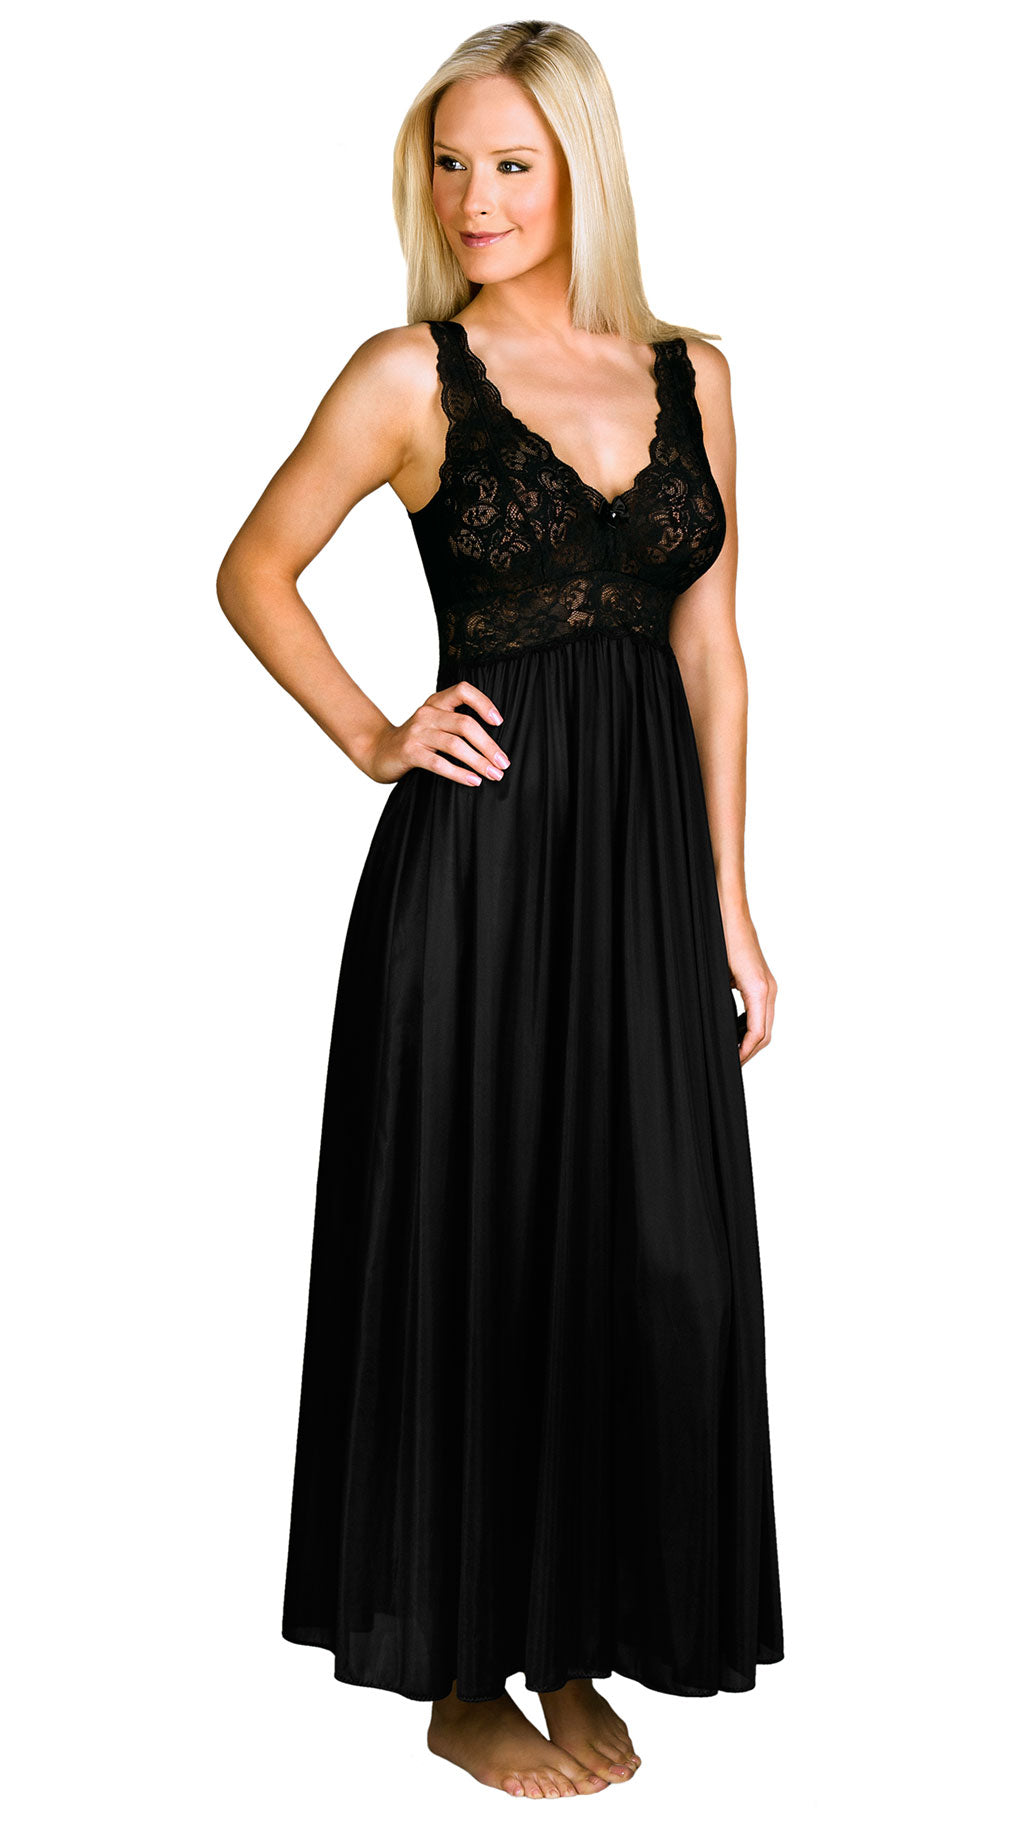 Long Lace Bodice Nightgown 31737 - Black